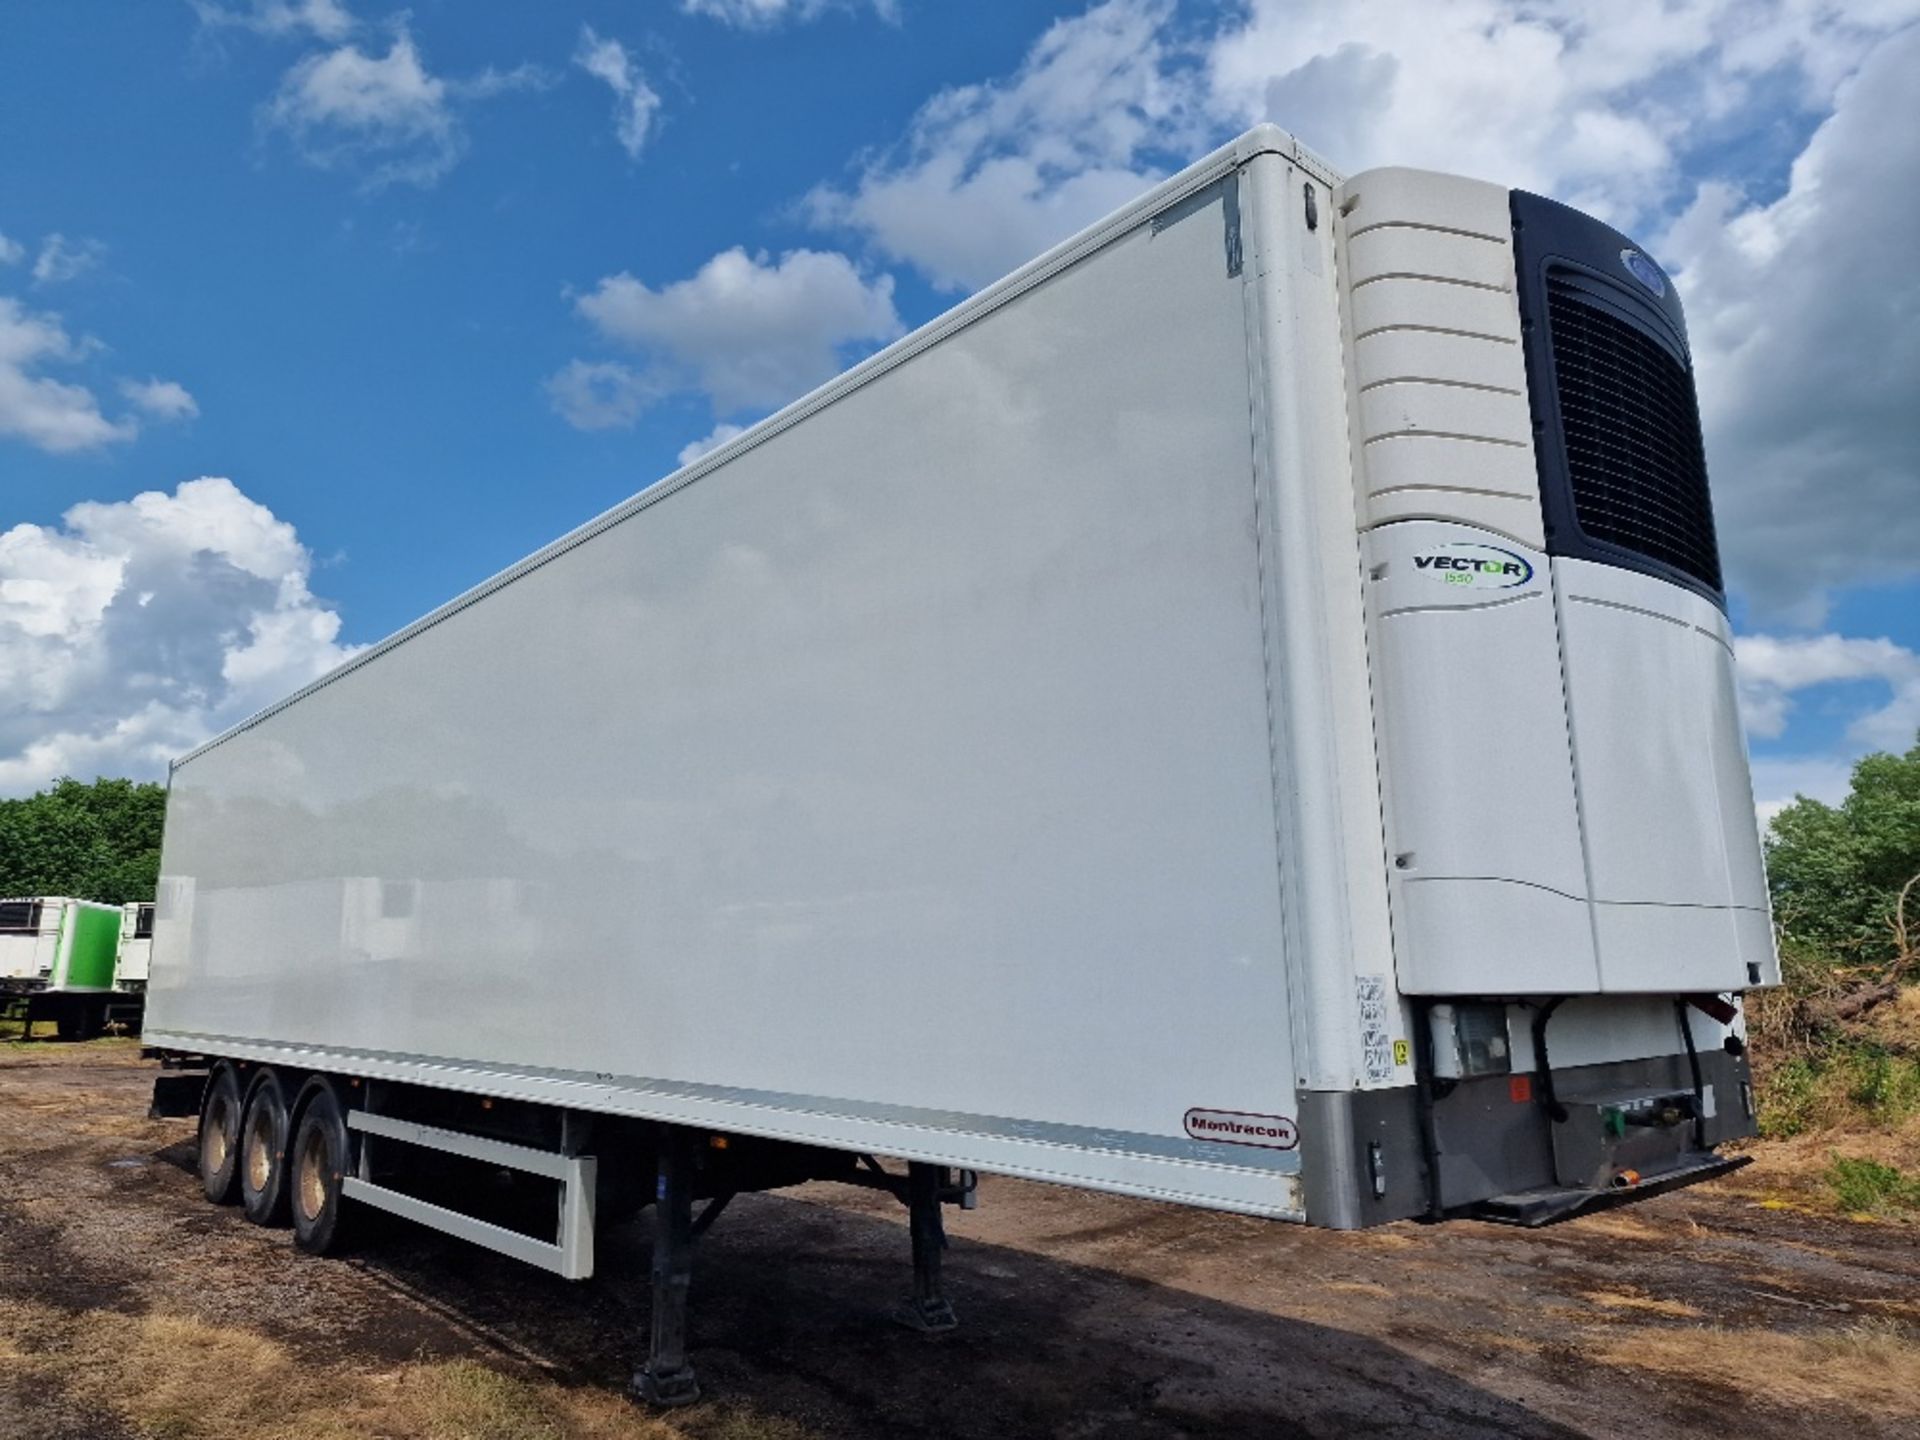 2014 Montracon 13.6m Tri-Axle Refrigerated Trailer - Image 17 of 18